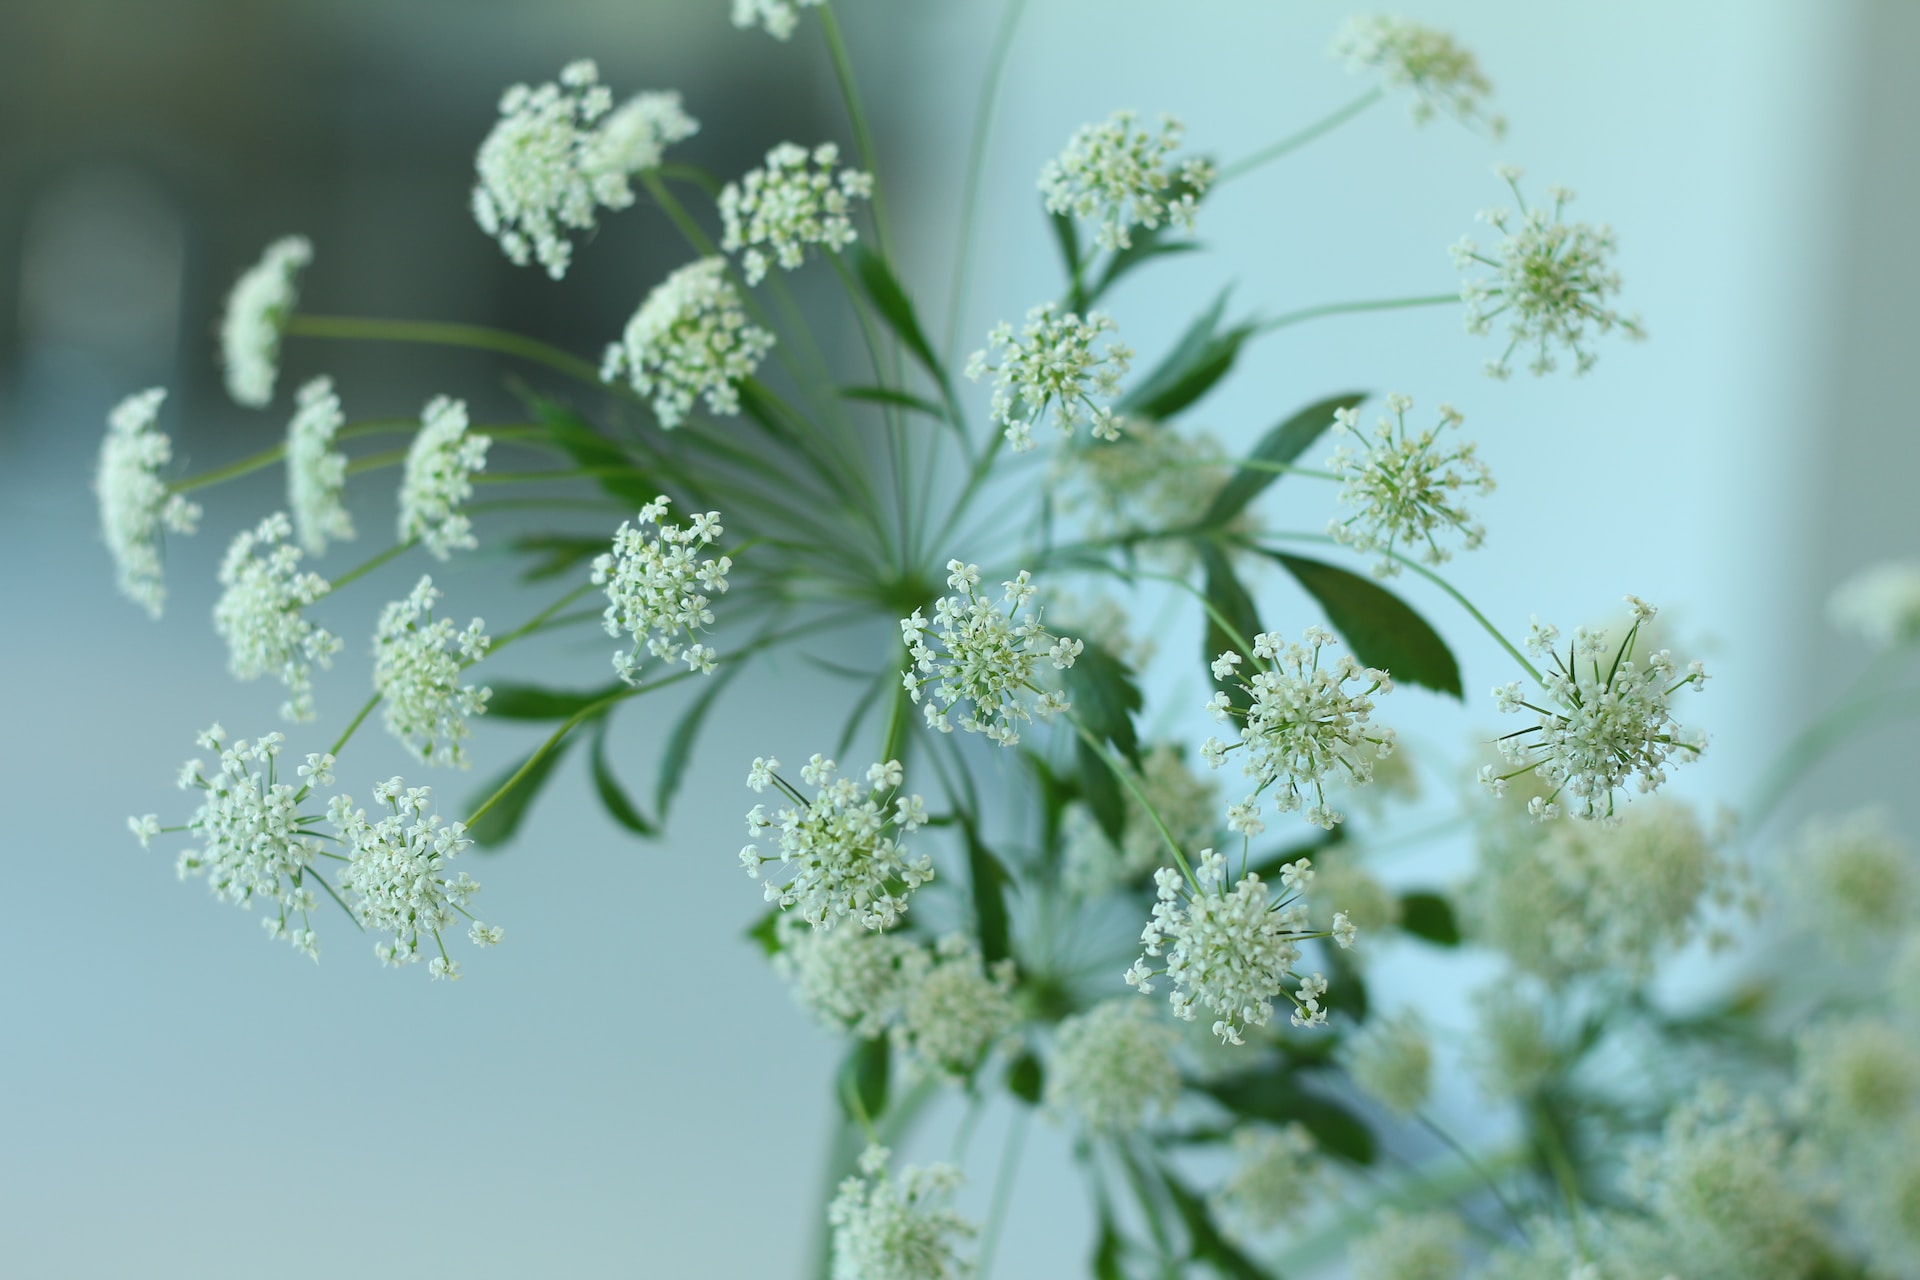 Angelica Herb for Protection